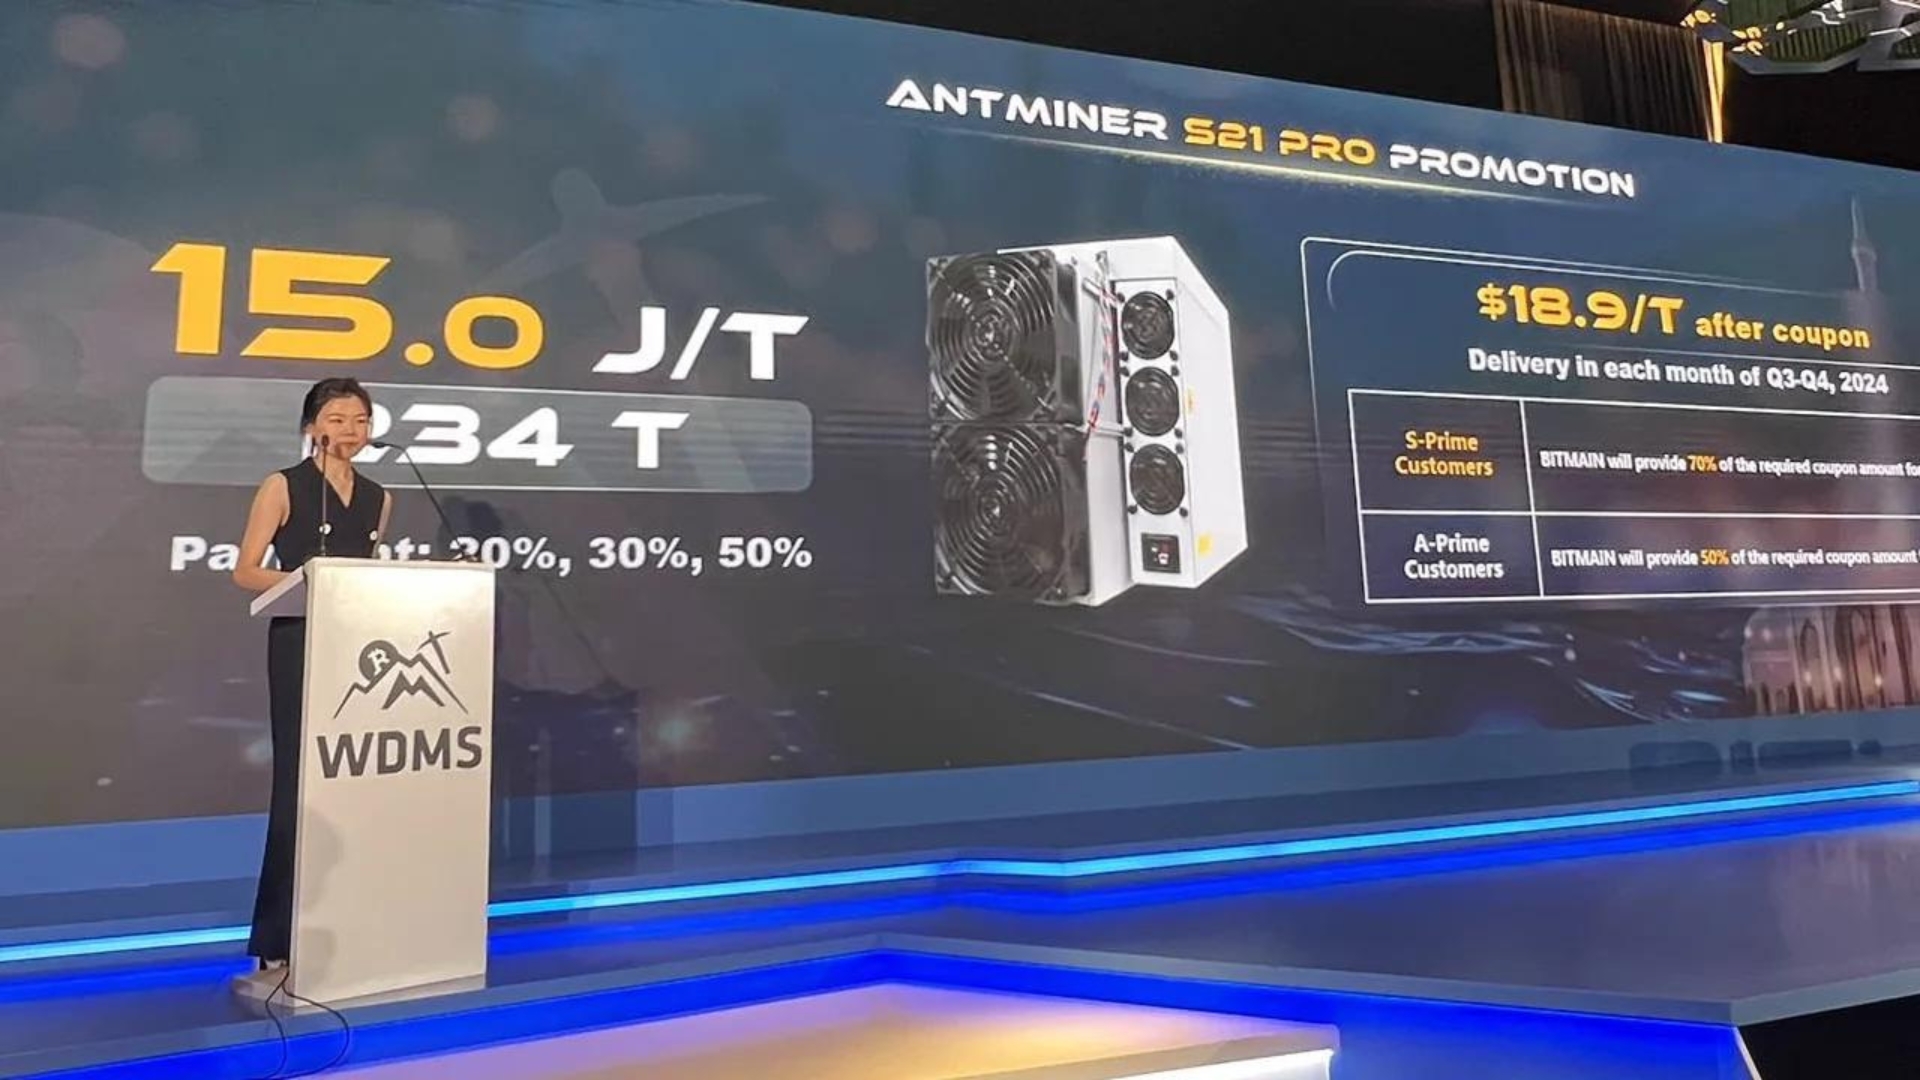 Bitmain Launches Antminer S21 Pro, Its Most Advanced Bitcoin Miner